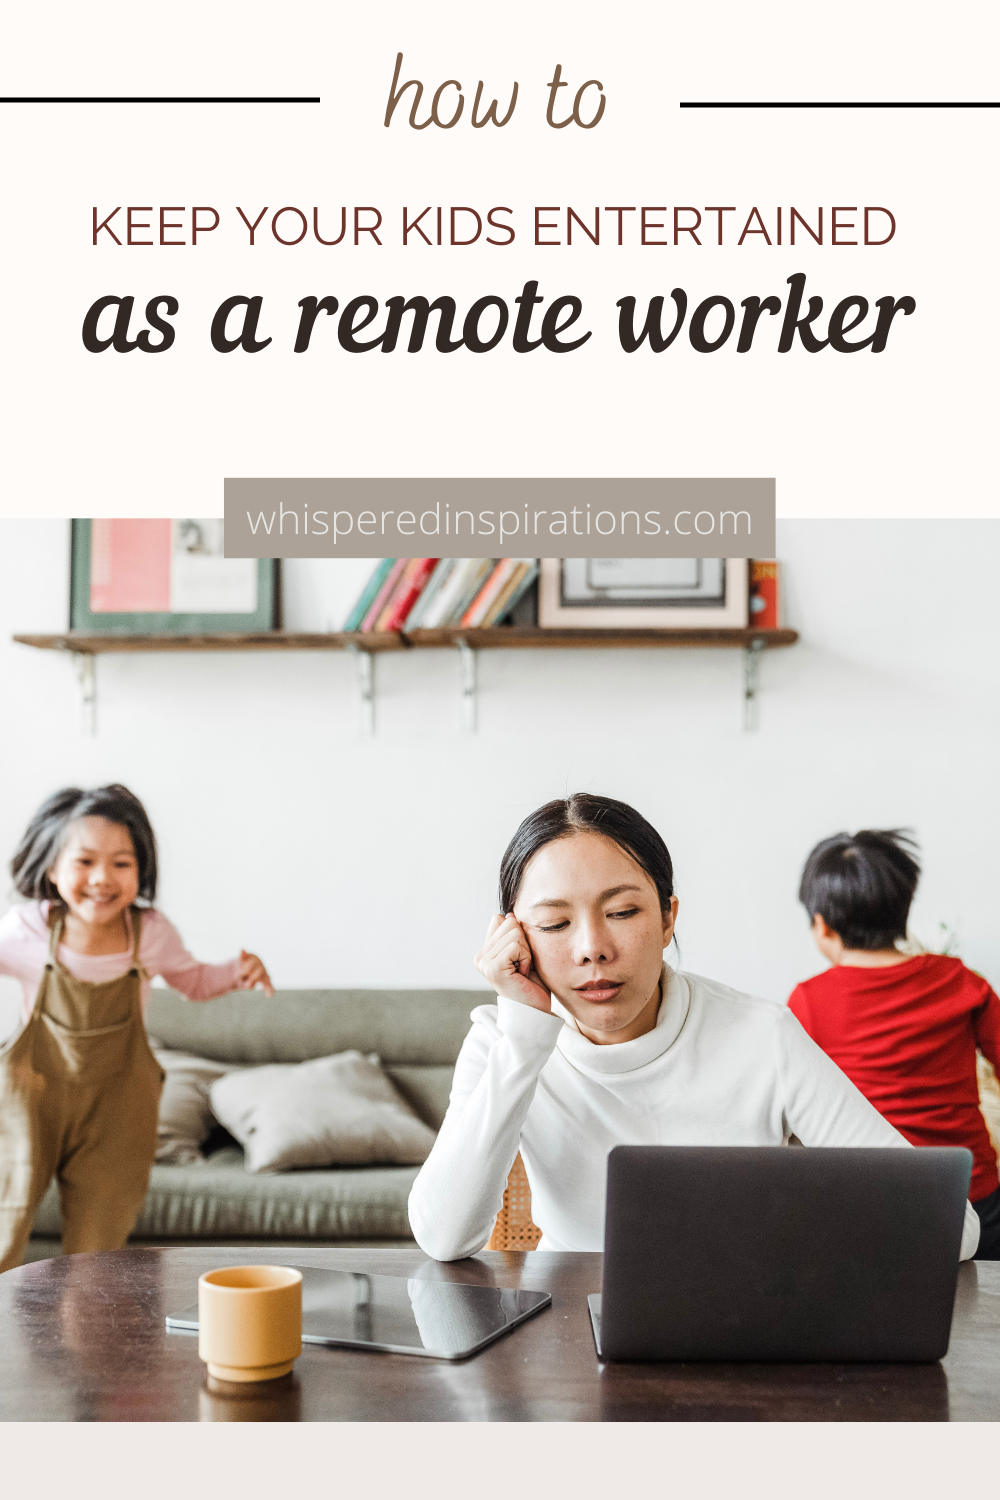 Woman is frustrating working at home with her child running around. This article covers how to keep your kids entertained as a remote worker.